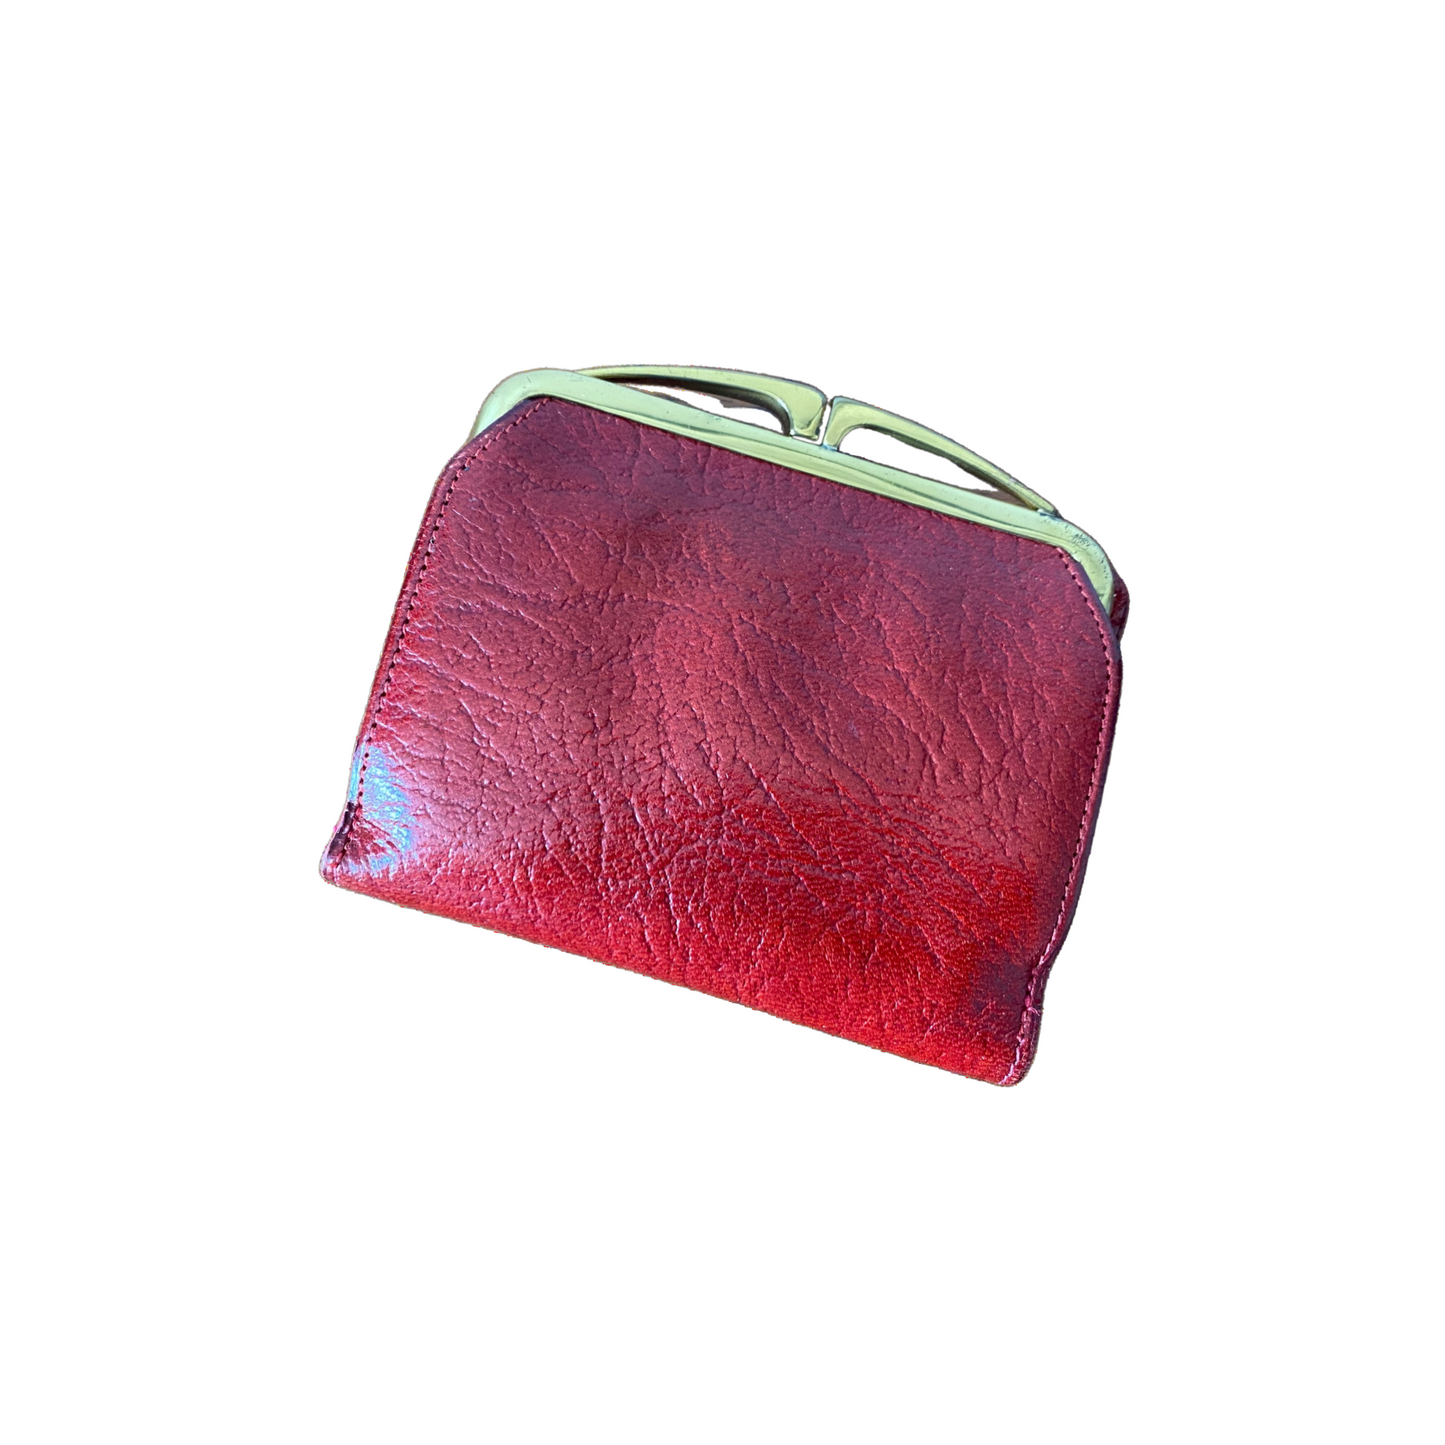 Textured red leather wallet with a popper opening and gold-tone metal frame